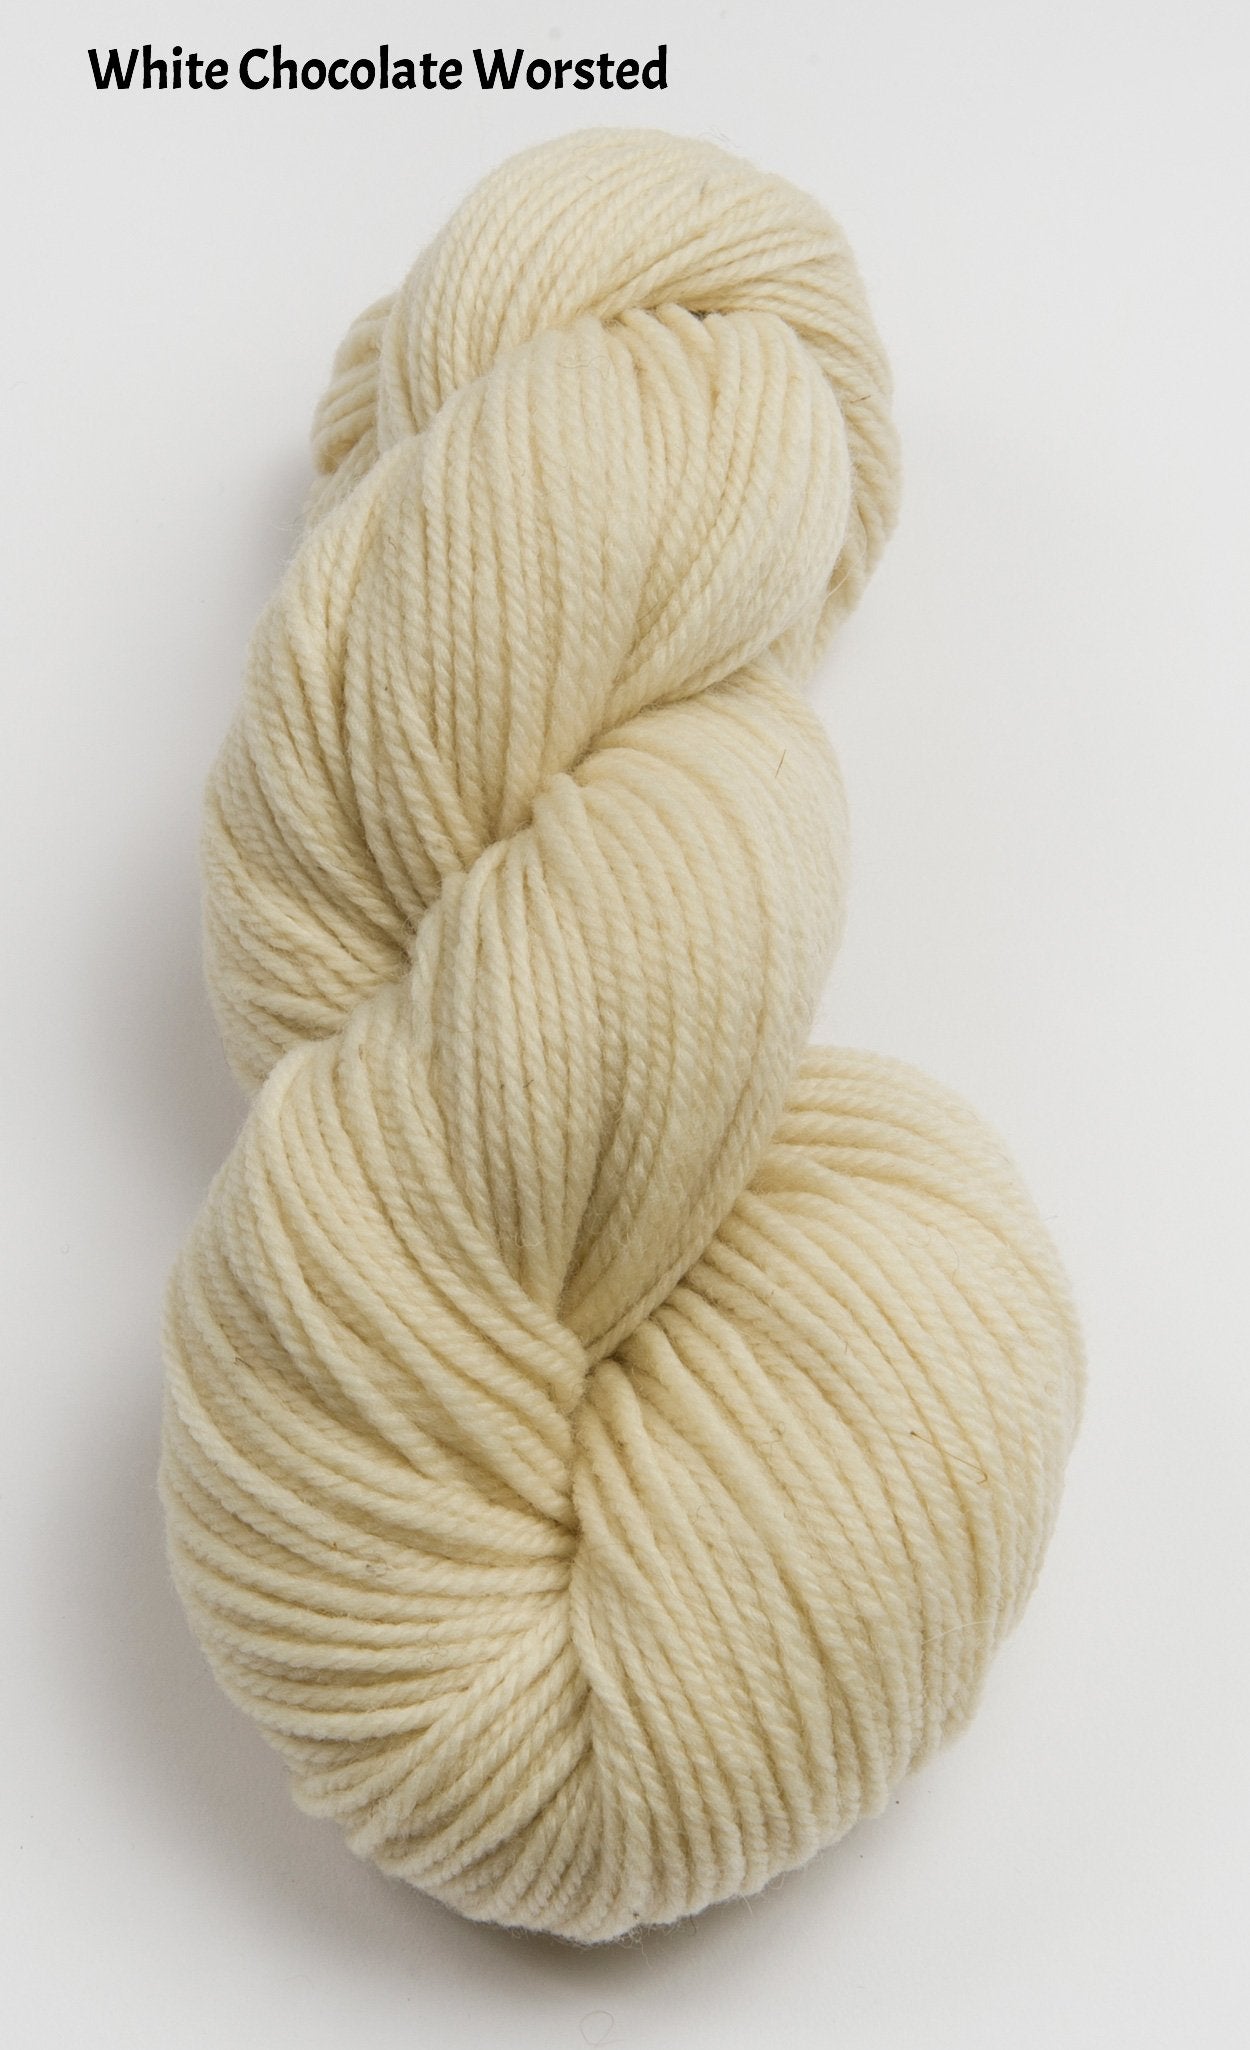 Confection Worsted